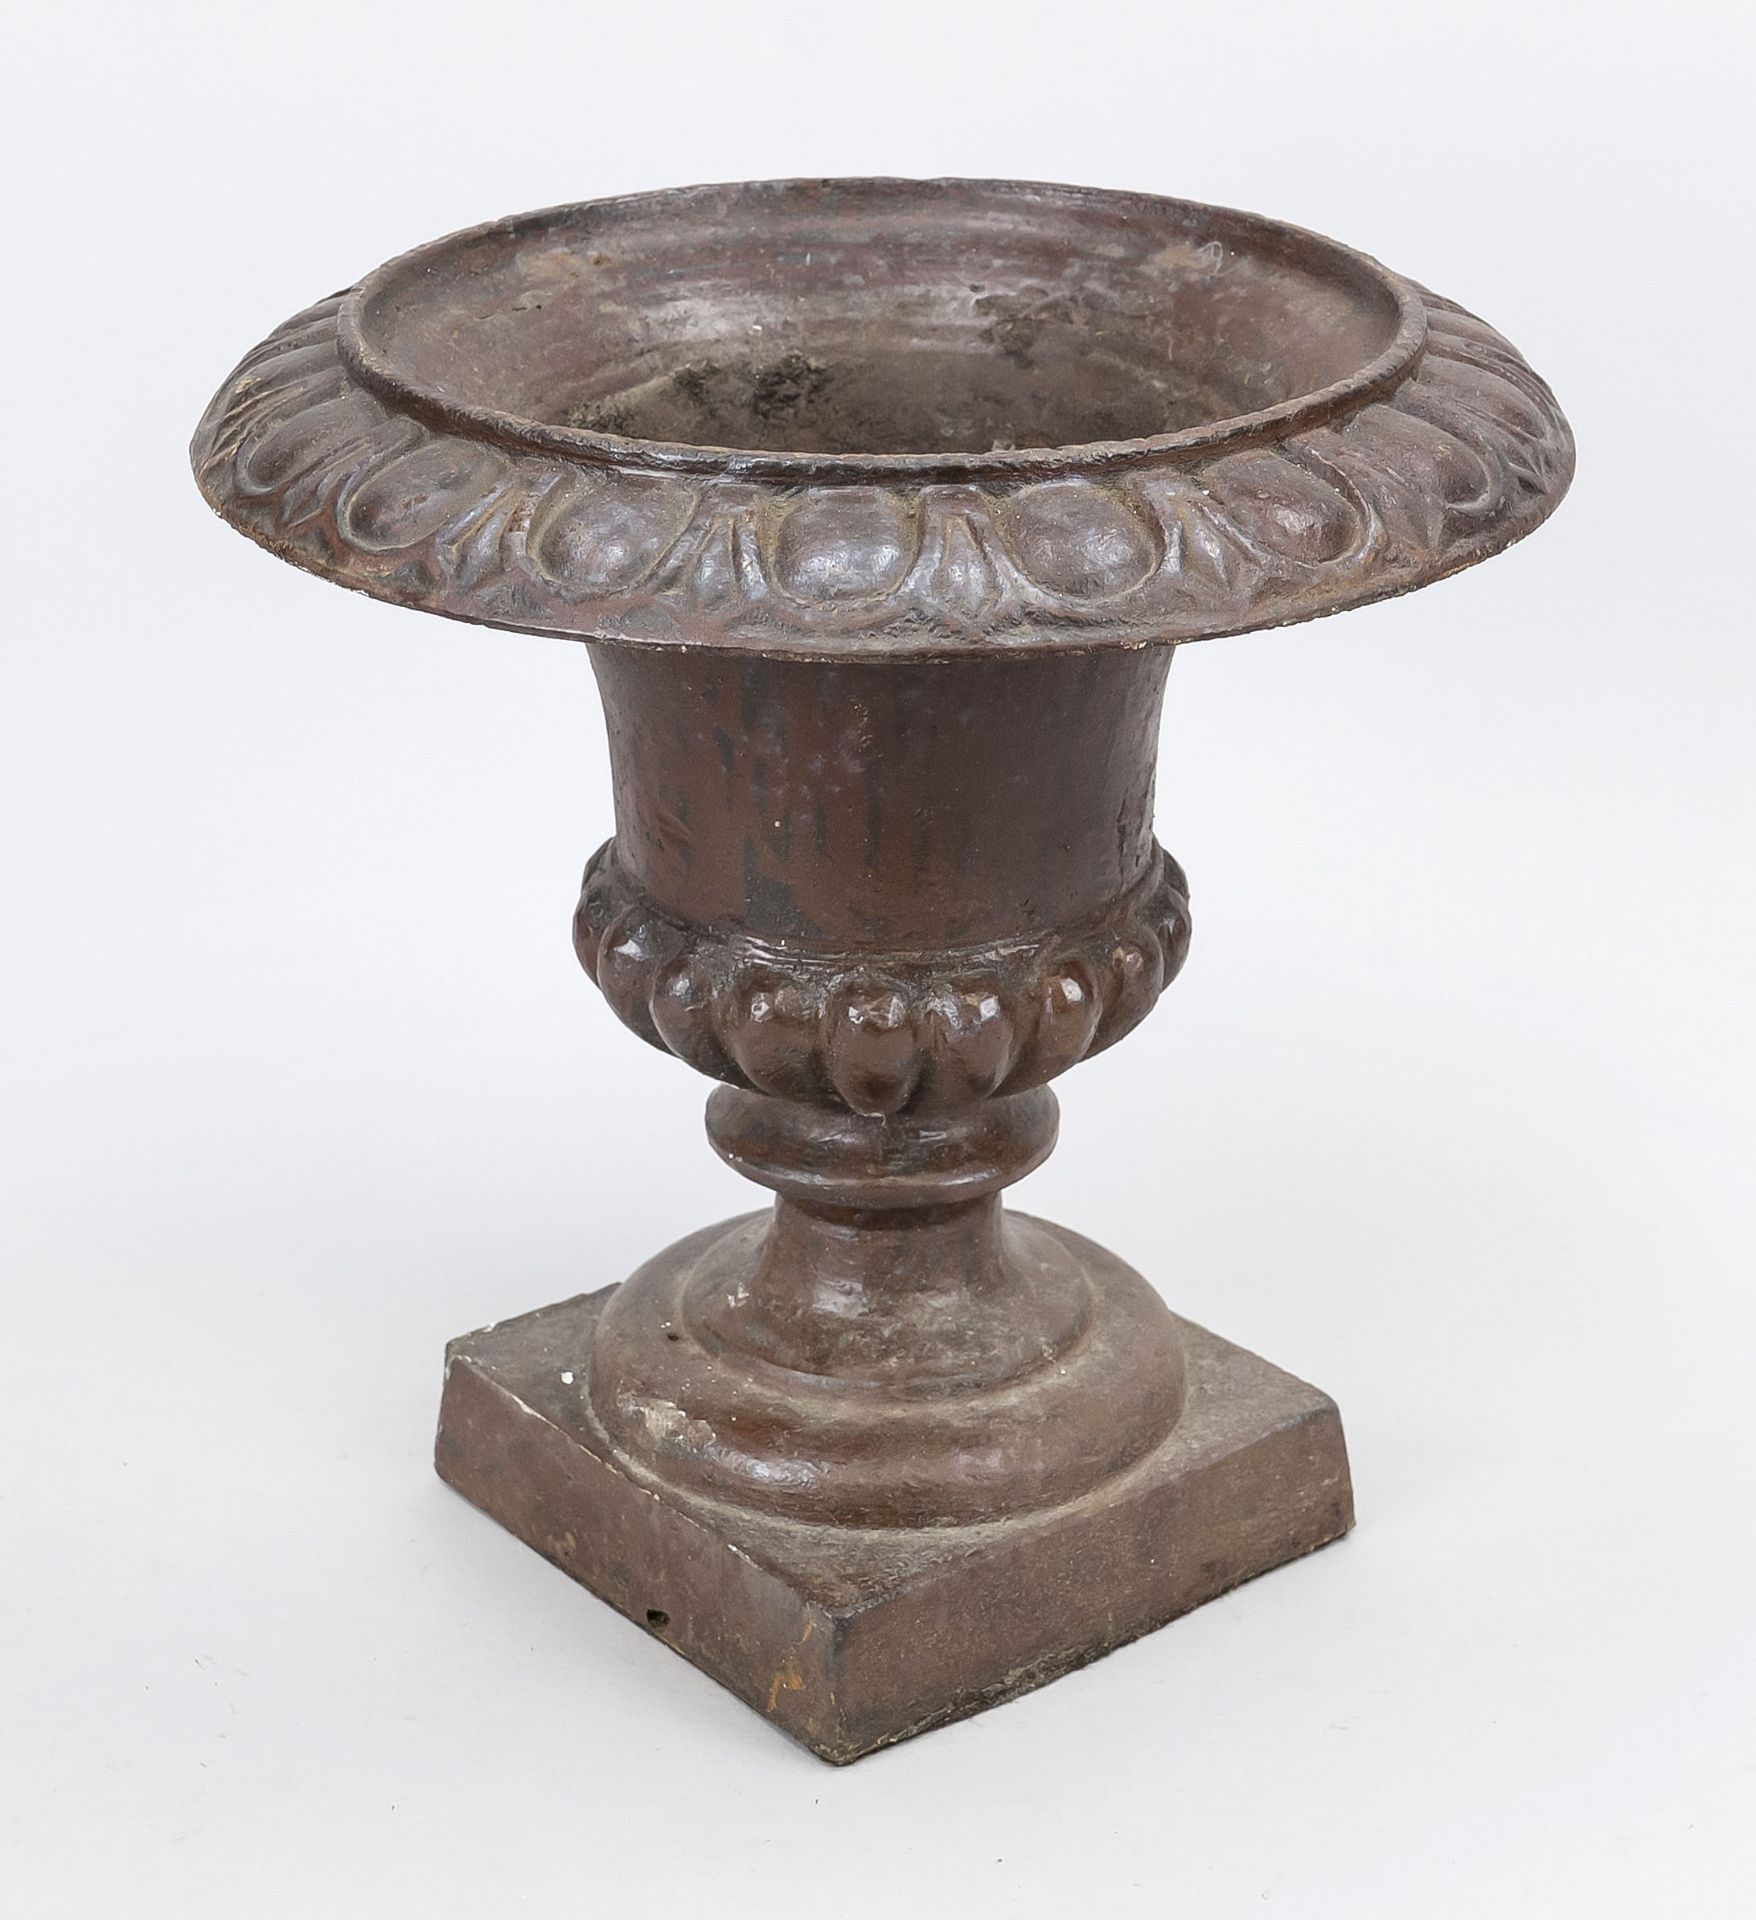 Crater vase, 20th century, cast iron, painted in color, dark brown/oxblood, square plinth, maker's